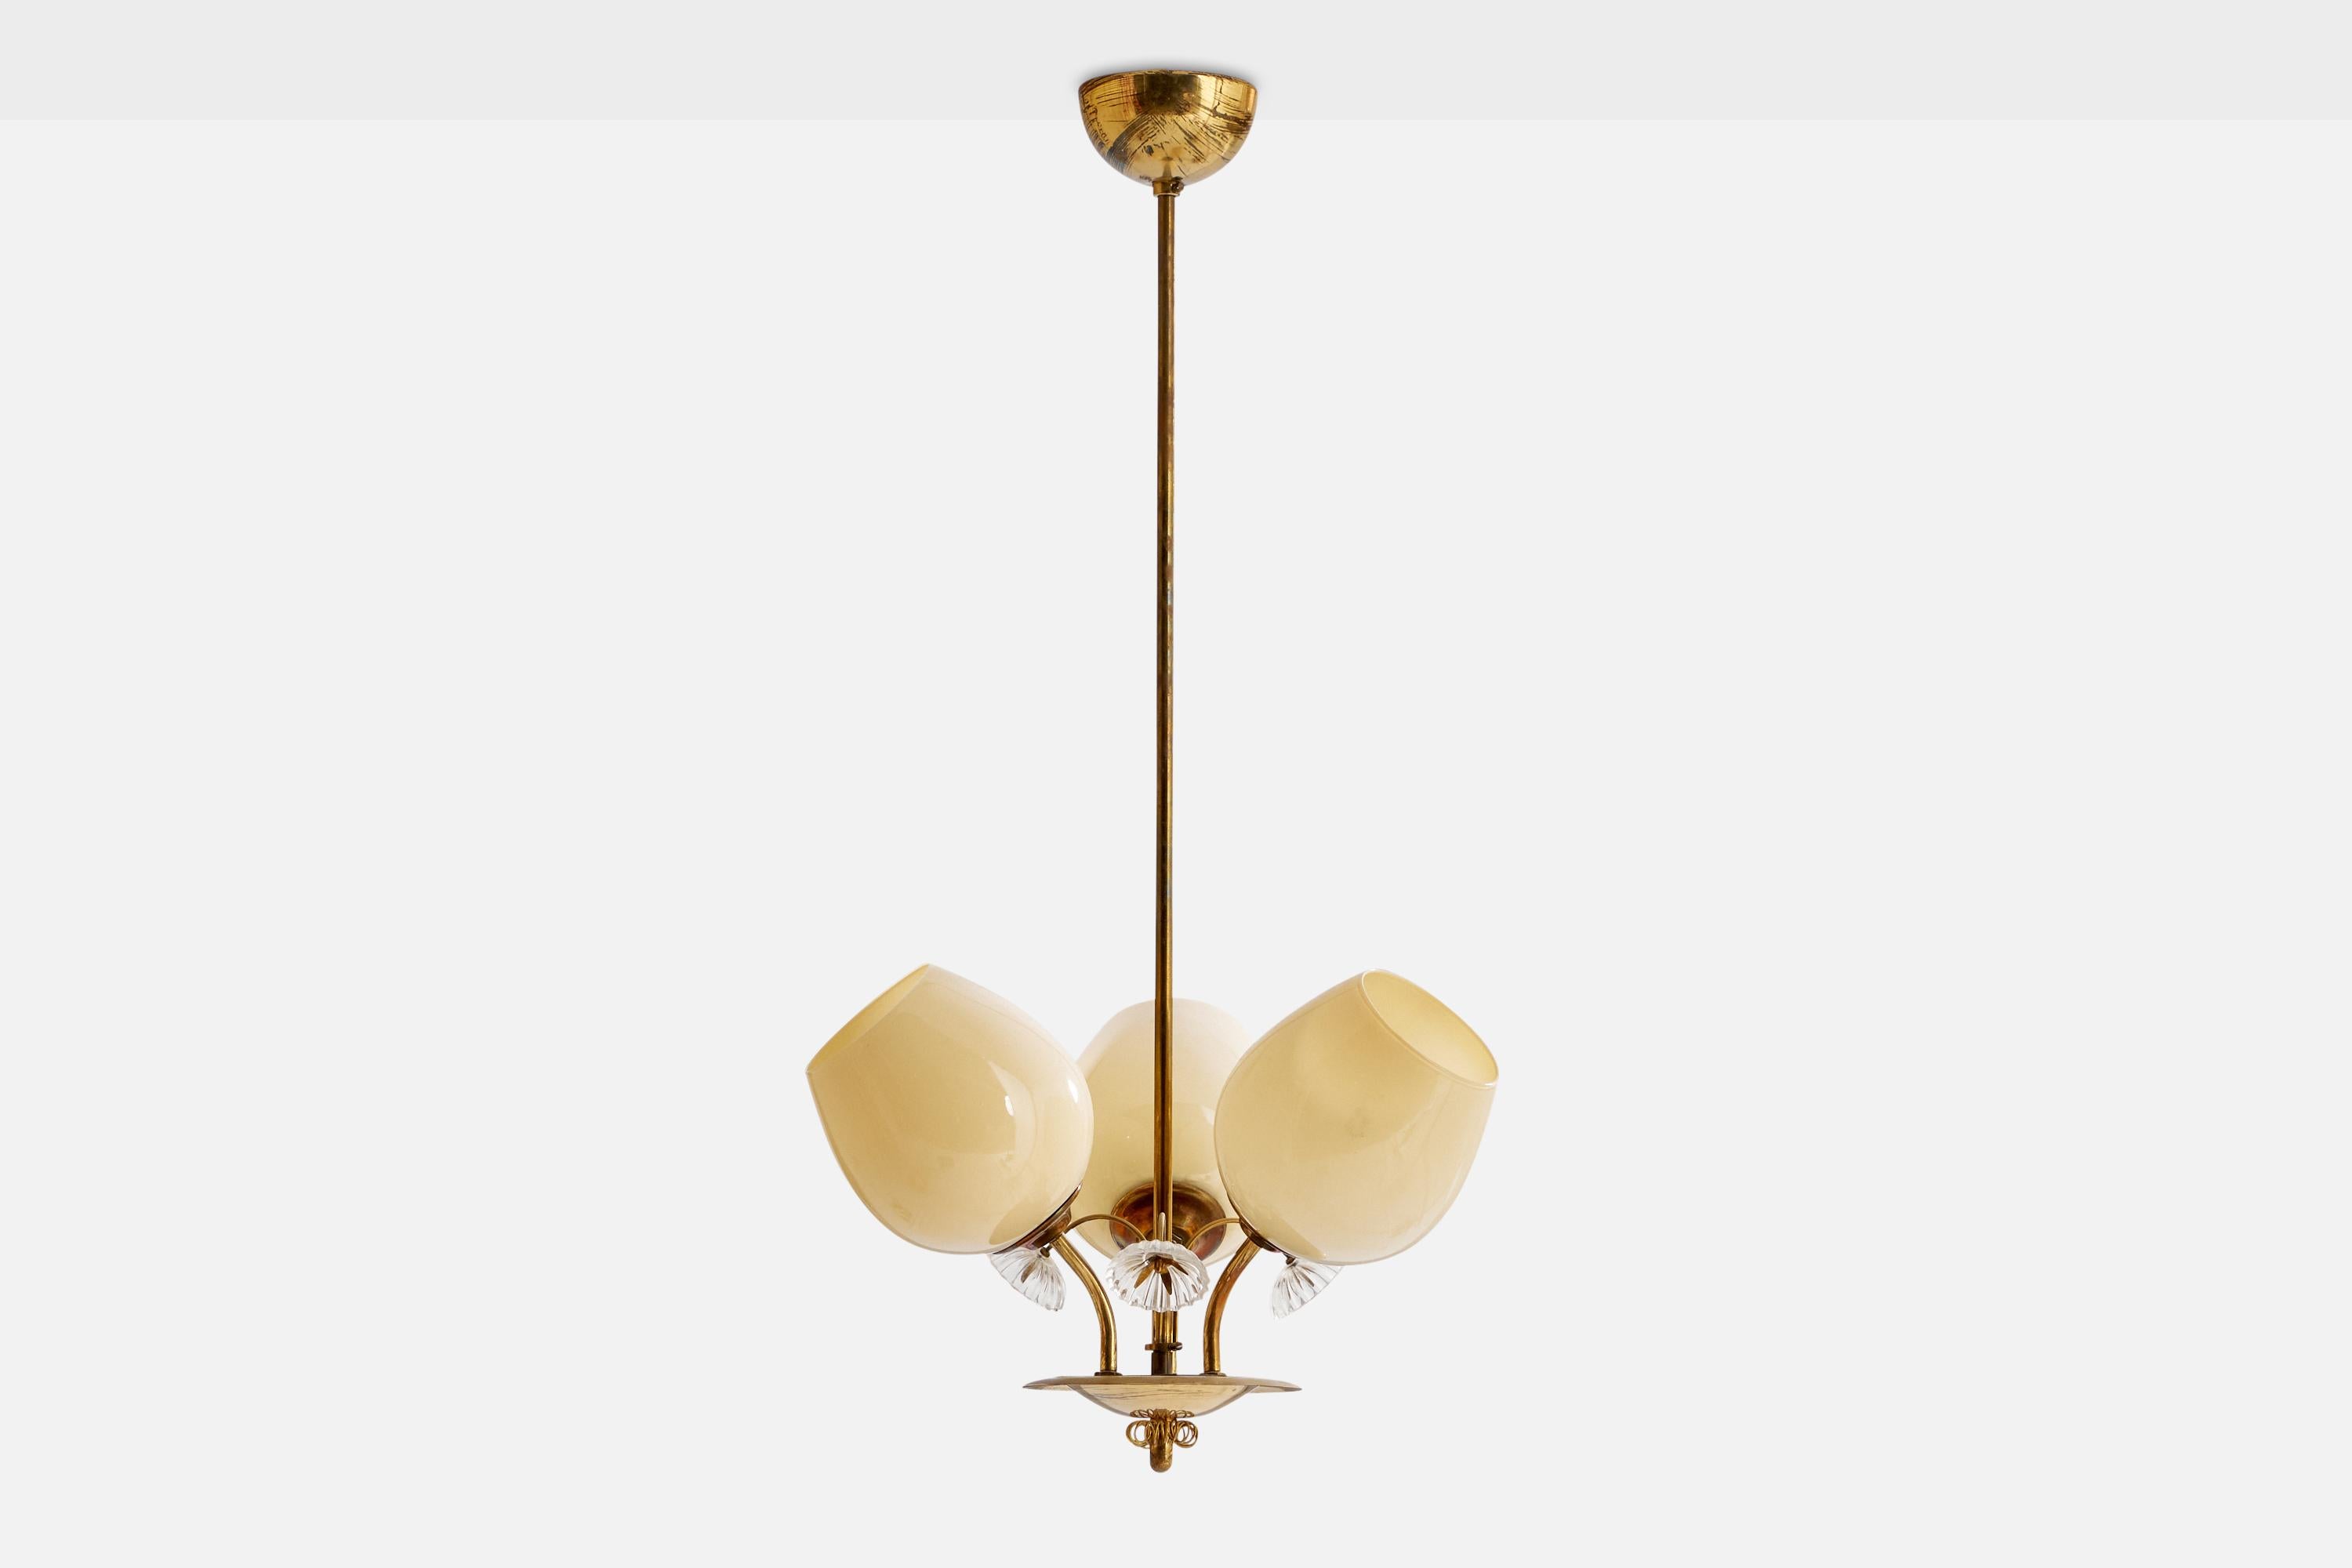 A brass, opaline glass and faceted glass chandelier designed and produced in Finland, 1940s.

Dimensions of canopy (inches): 2.3” H x 4” Diameter
Socket takes standard E-26 bulbs. 3 sockets.There is no maximum wattage stated on the fixture. All